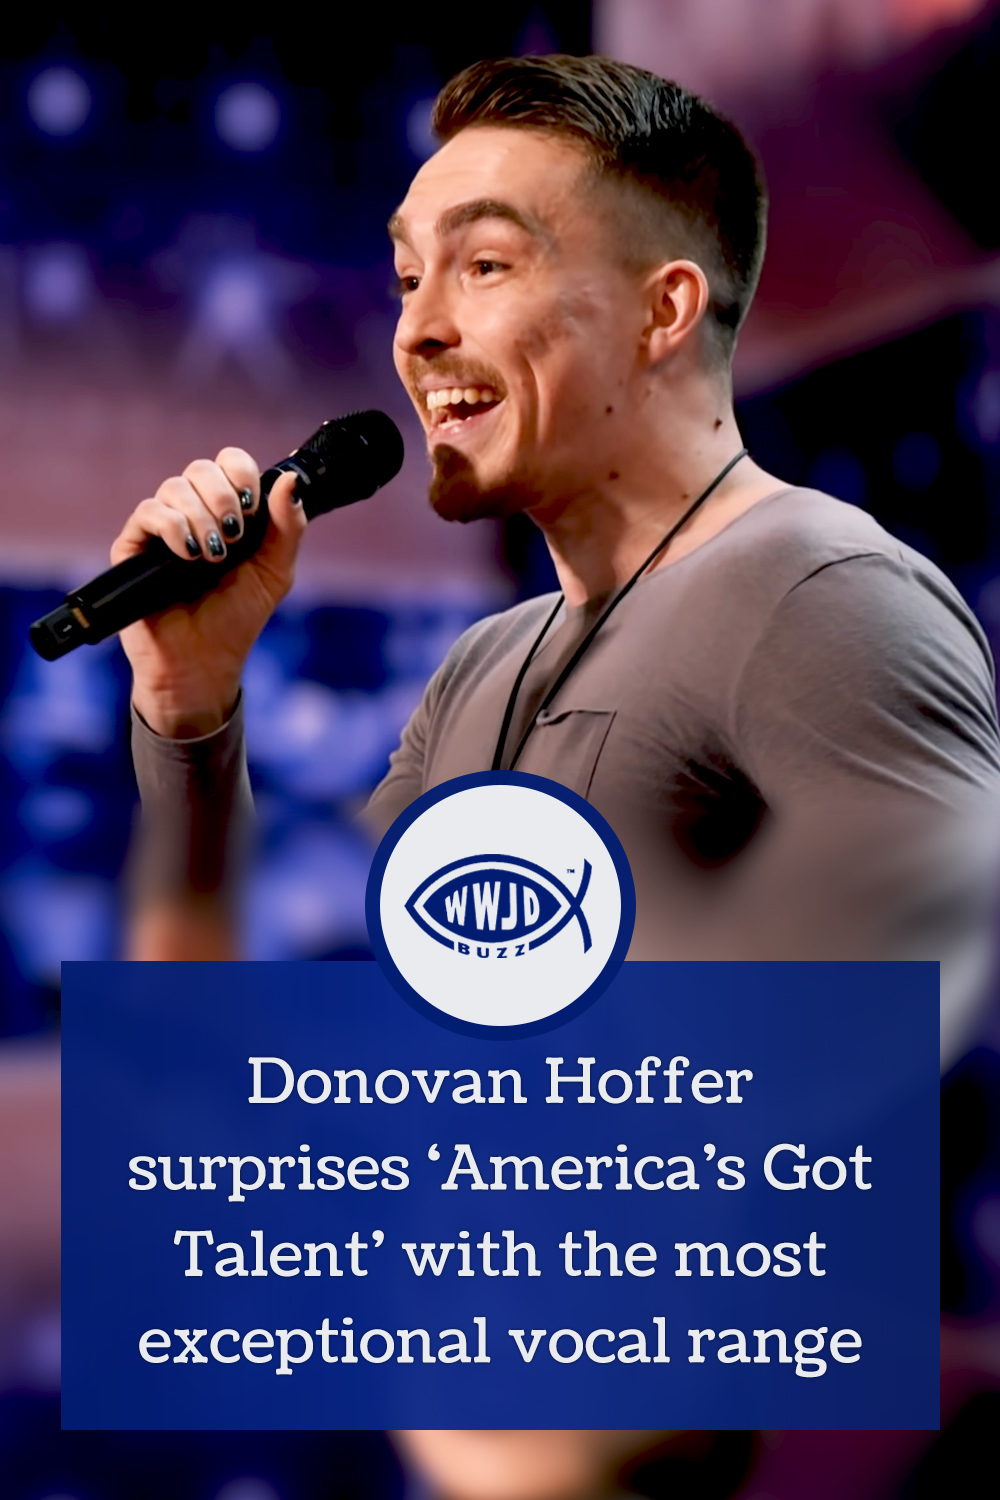 Donovan Hoffer surprises ‘America’s Got Talent’ with the most exceptional vocal range